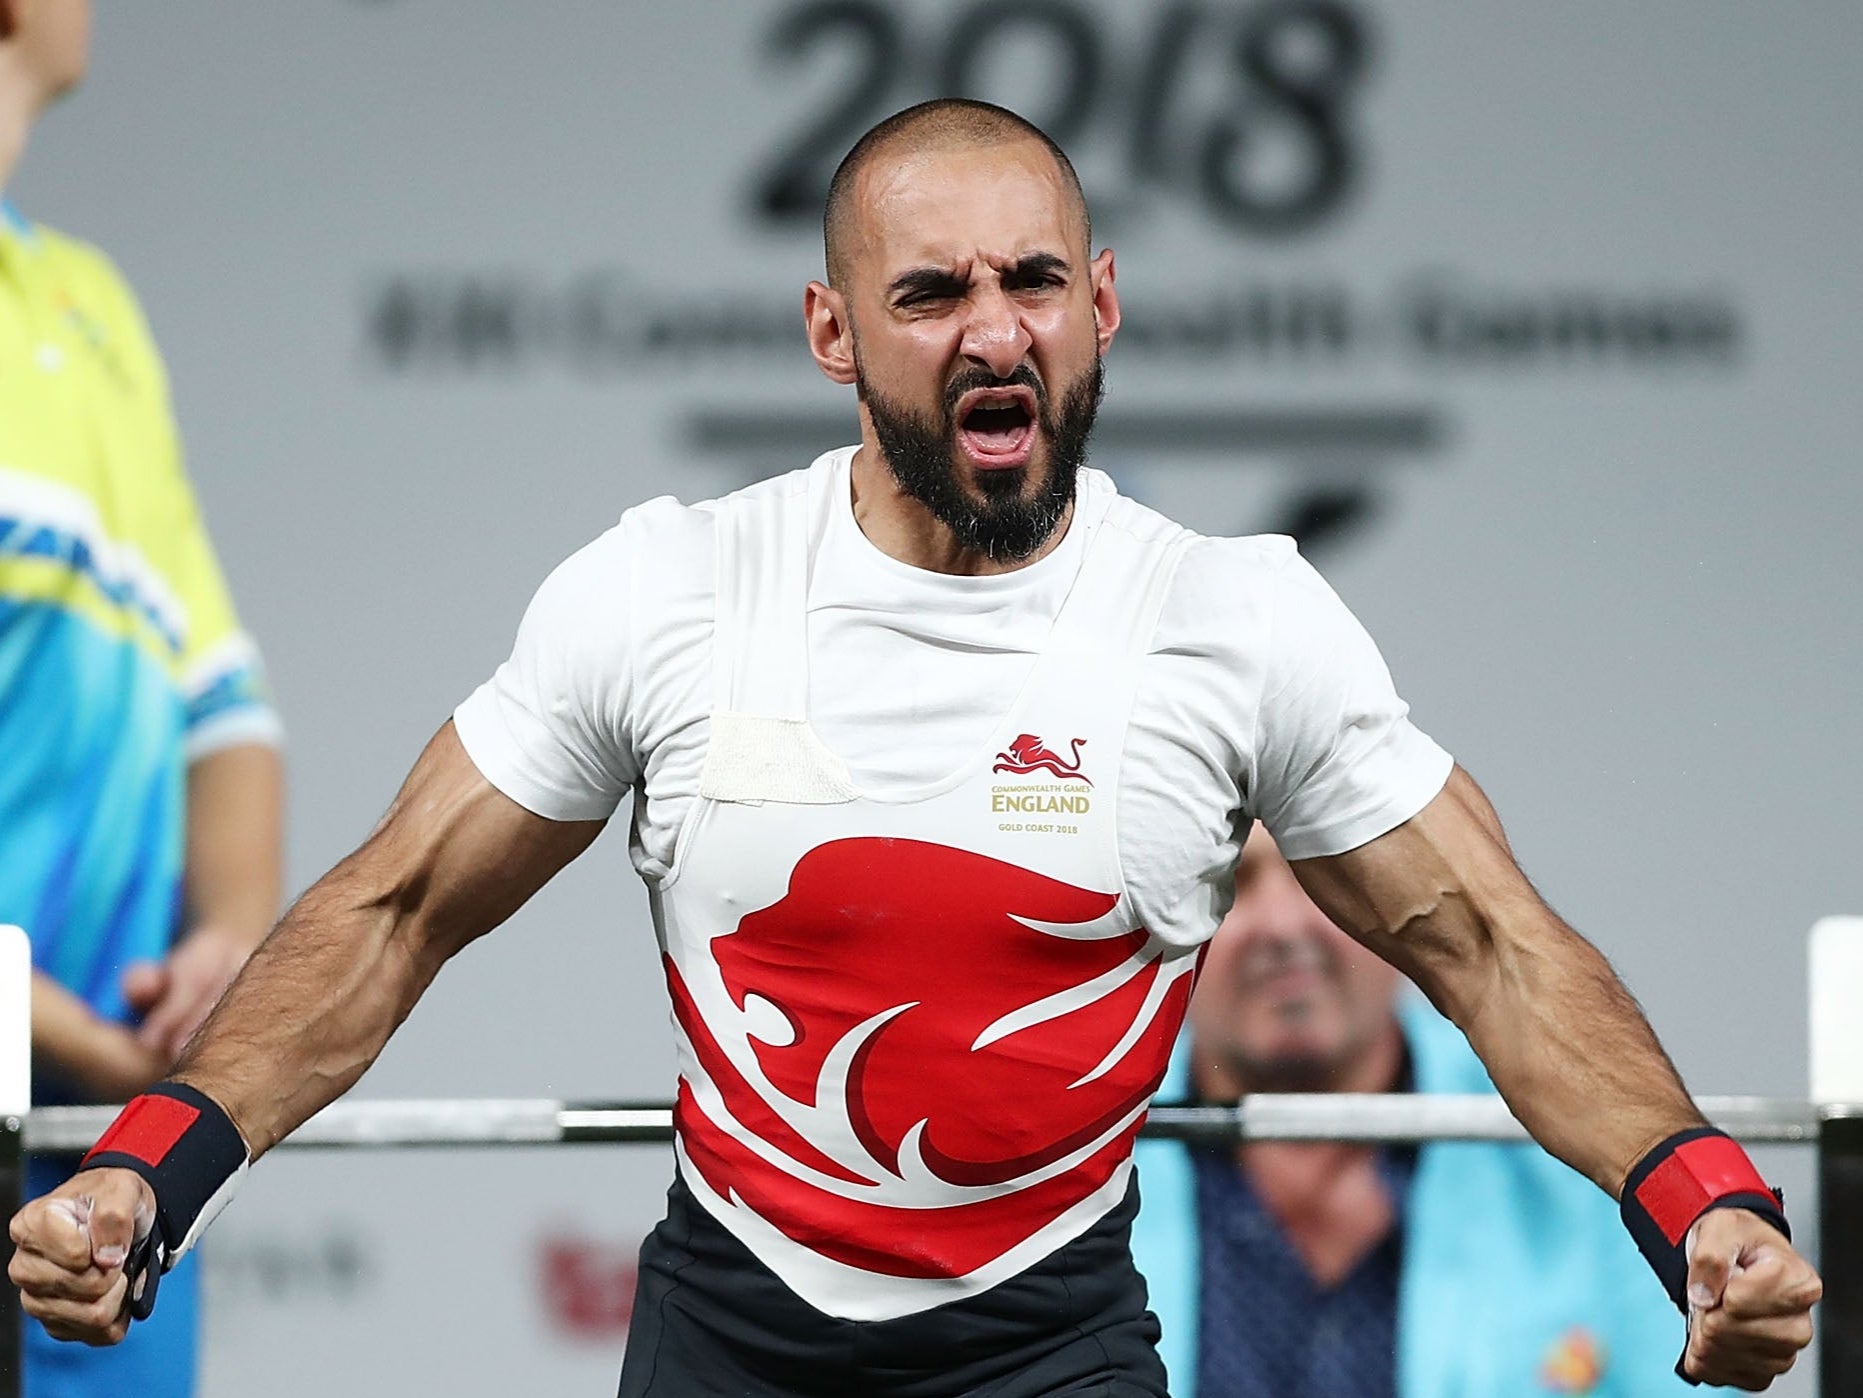 Ali Jawad of England celebrates a lift in the Men’s Lightweight Final during the Para Powerlifting on day six of the Gold Coast 2018 Commonwealth Games